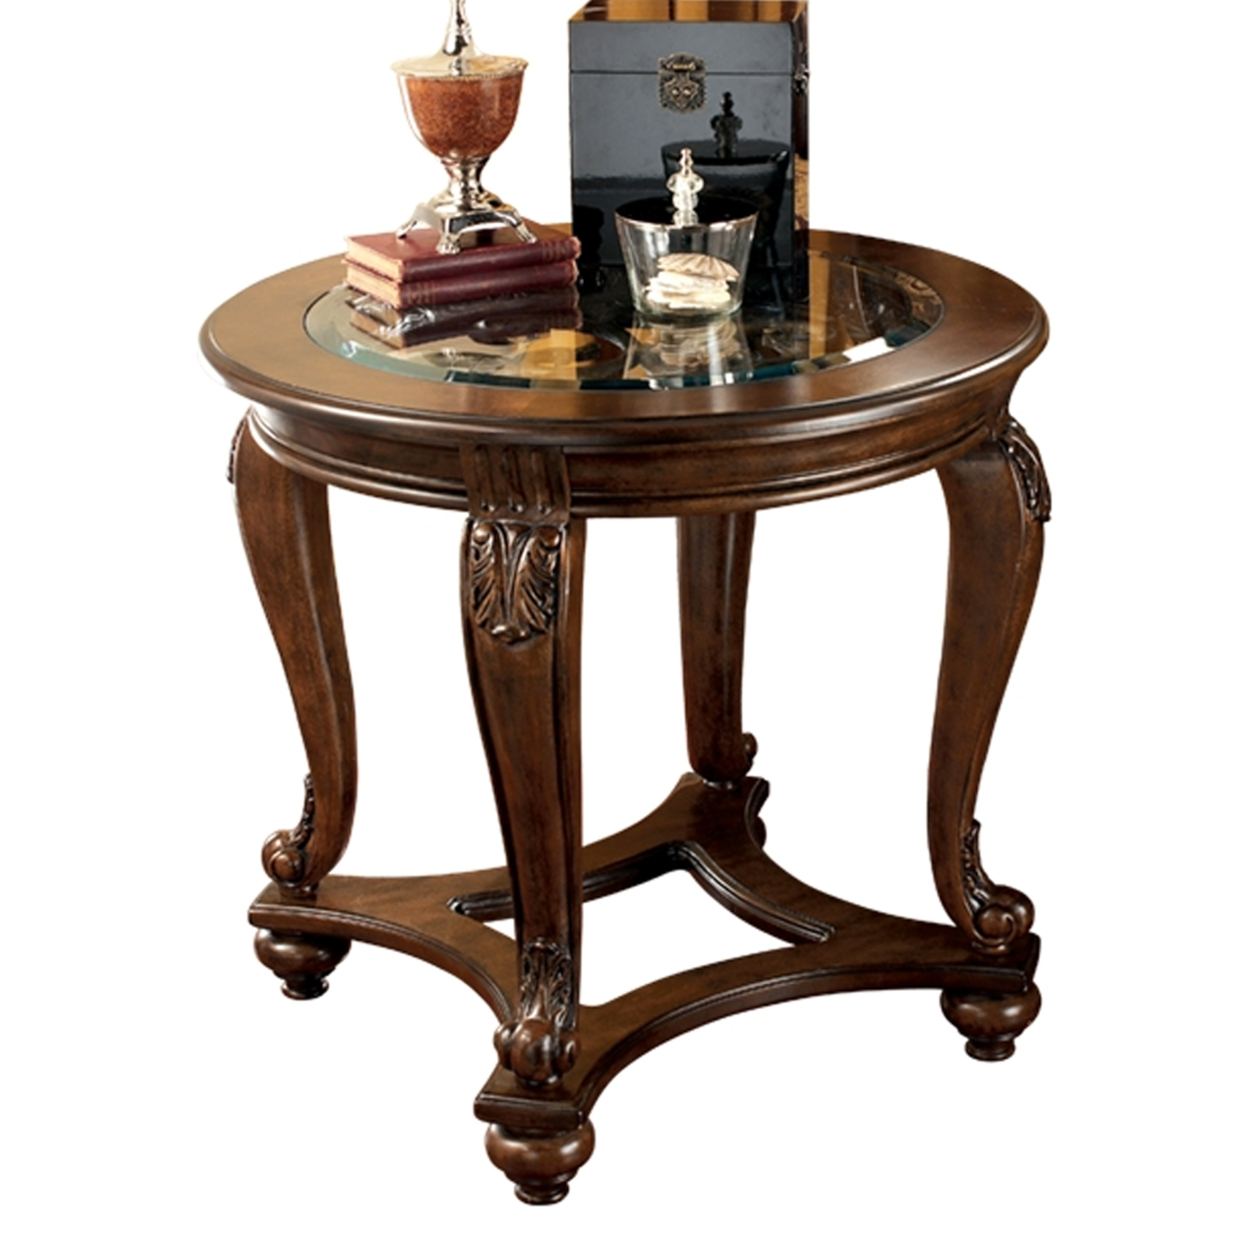 Wooden Round End Table With Cabriole Legs And Glass Top, Brown- Saltoro Sherpi